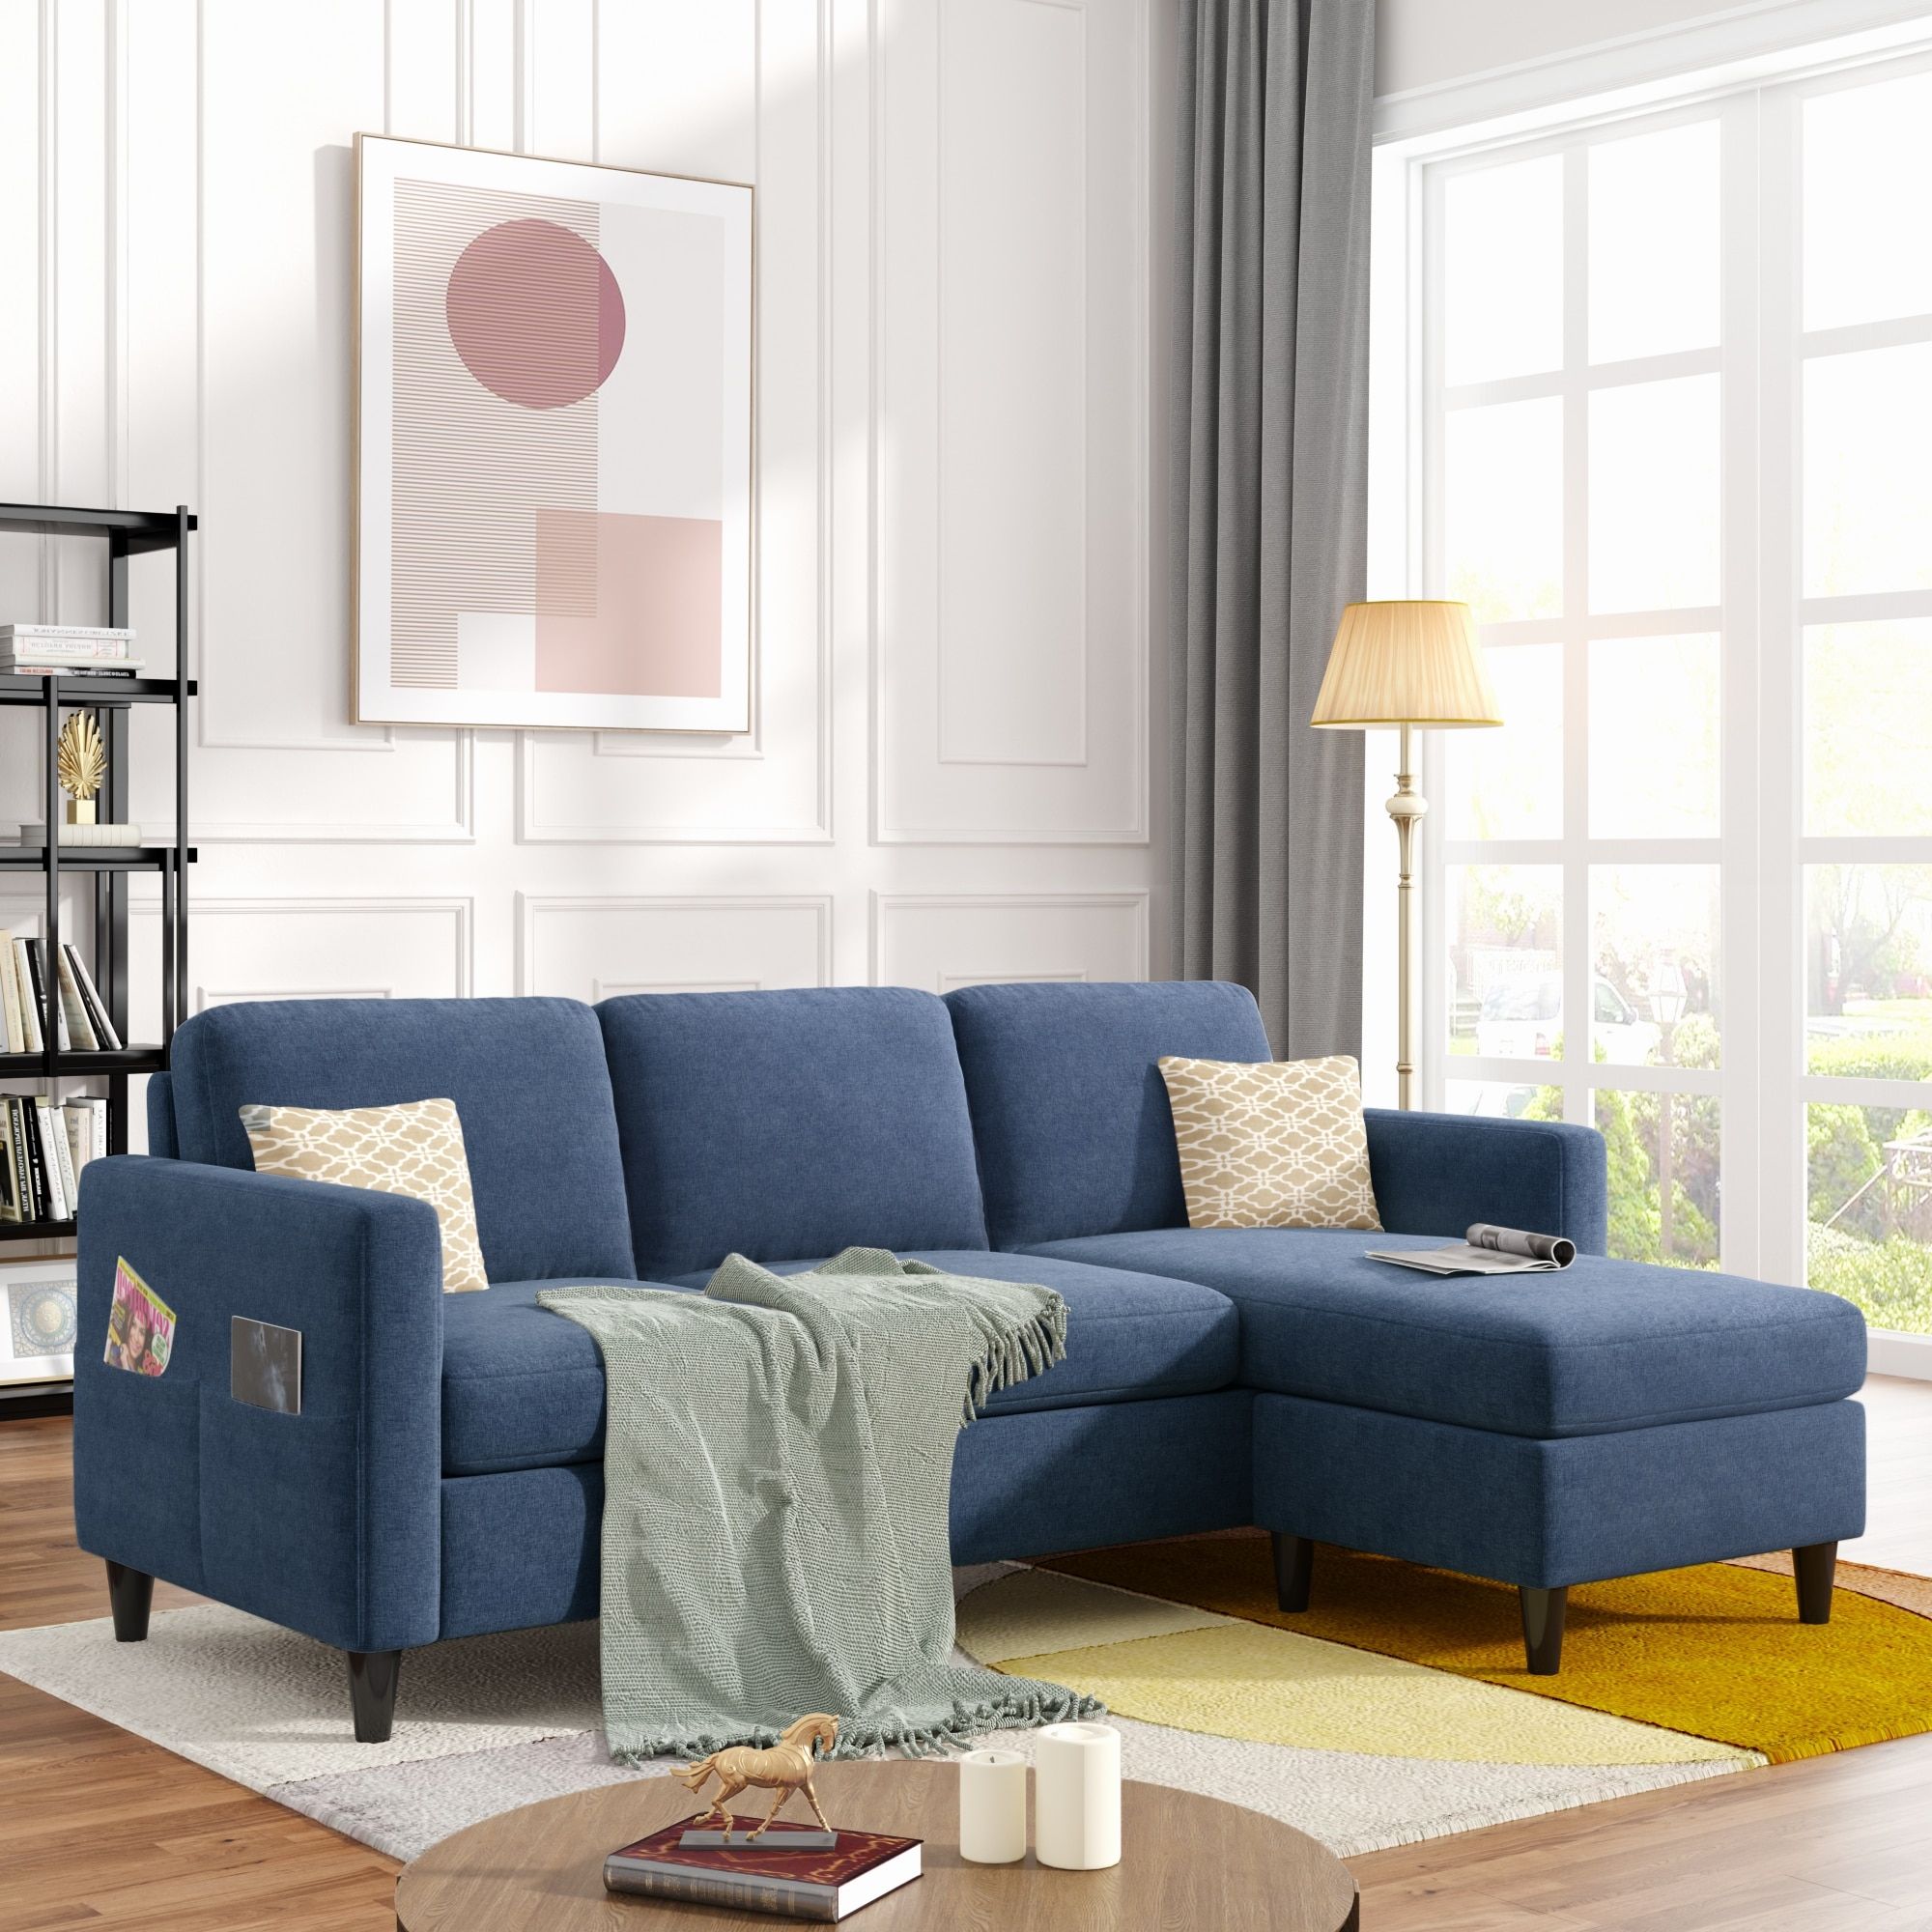 Reversible Sectional Sofa,l Shape 3 Seater Couch With Storage,blue –  Overstock – 37563704 Throughout 3 Seat Sofa Sectionals With Reversible Chaise (View 8 of 20)